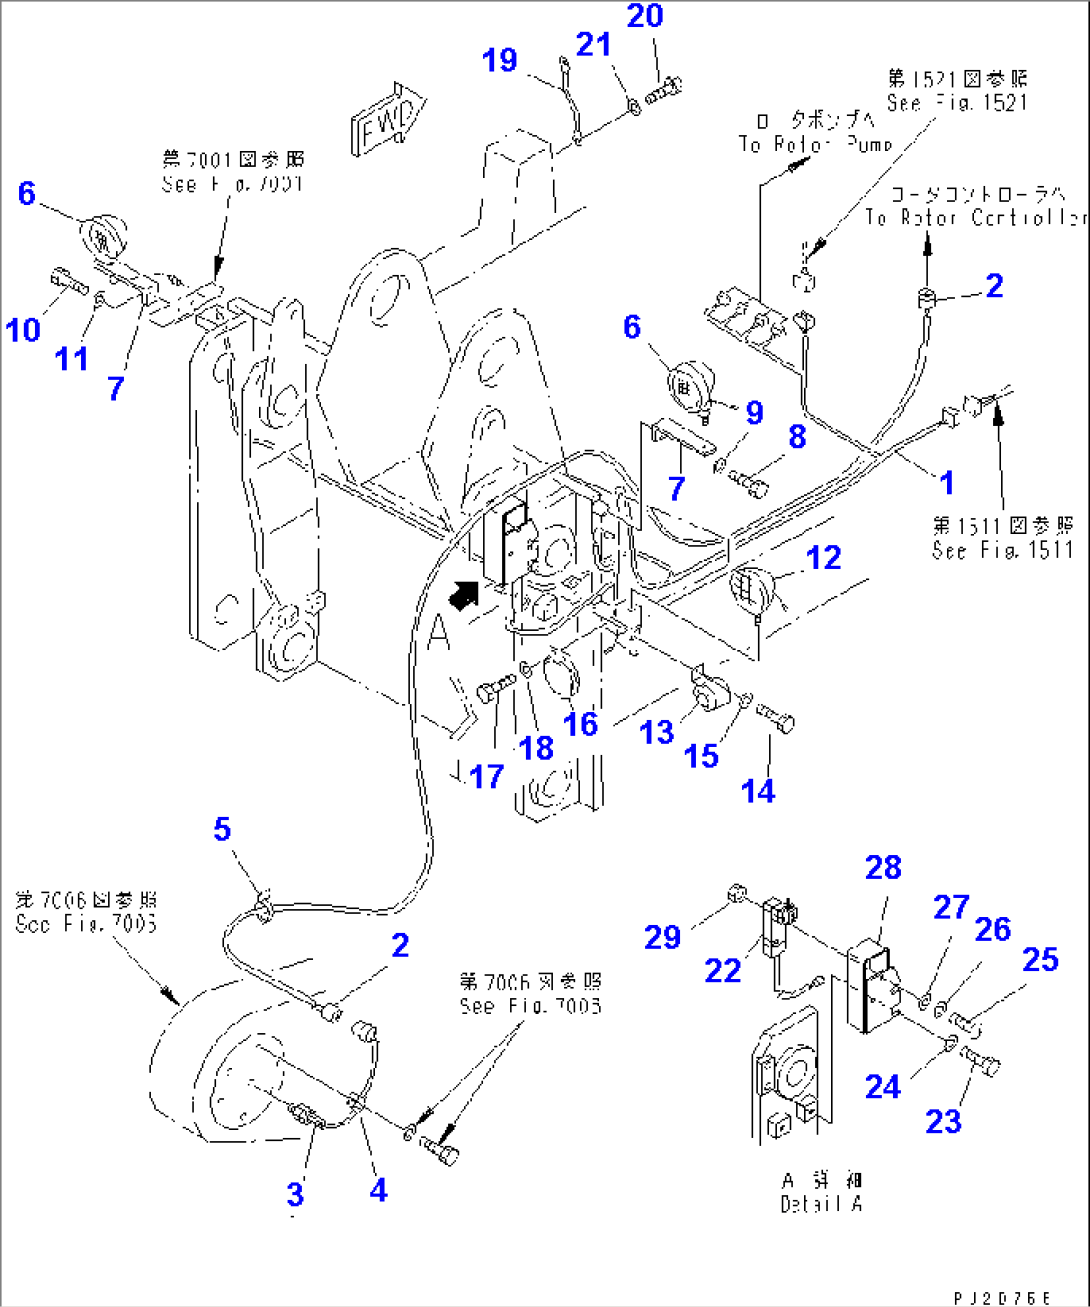 ELECTRICAL SYSTEM (REAR LINE)(#11502-11517)